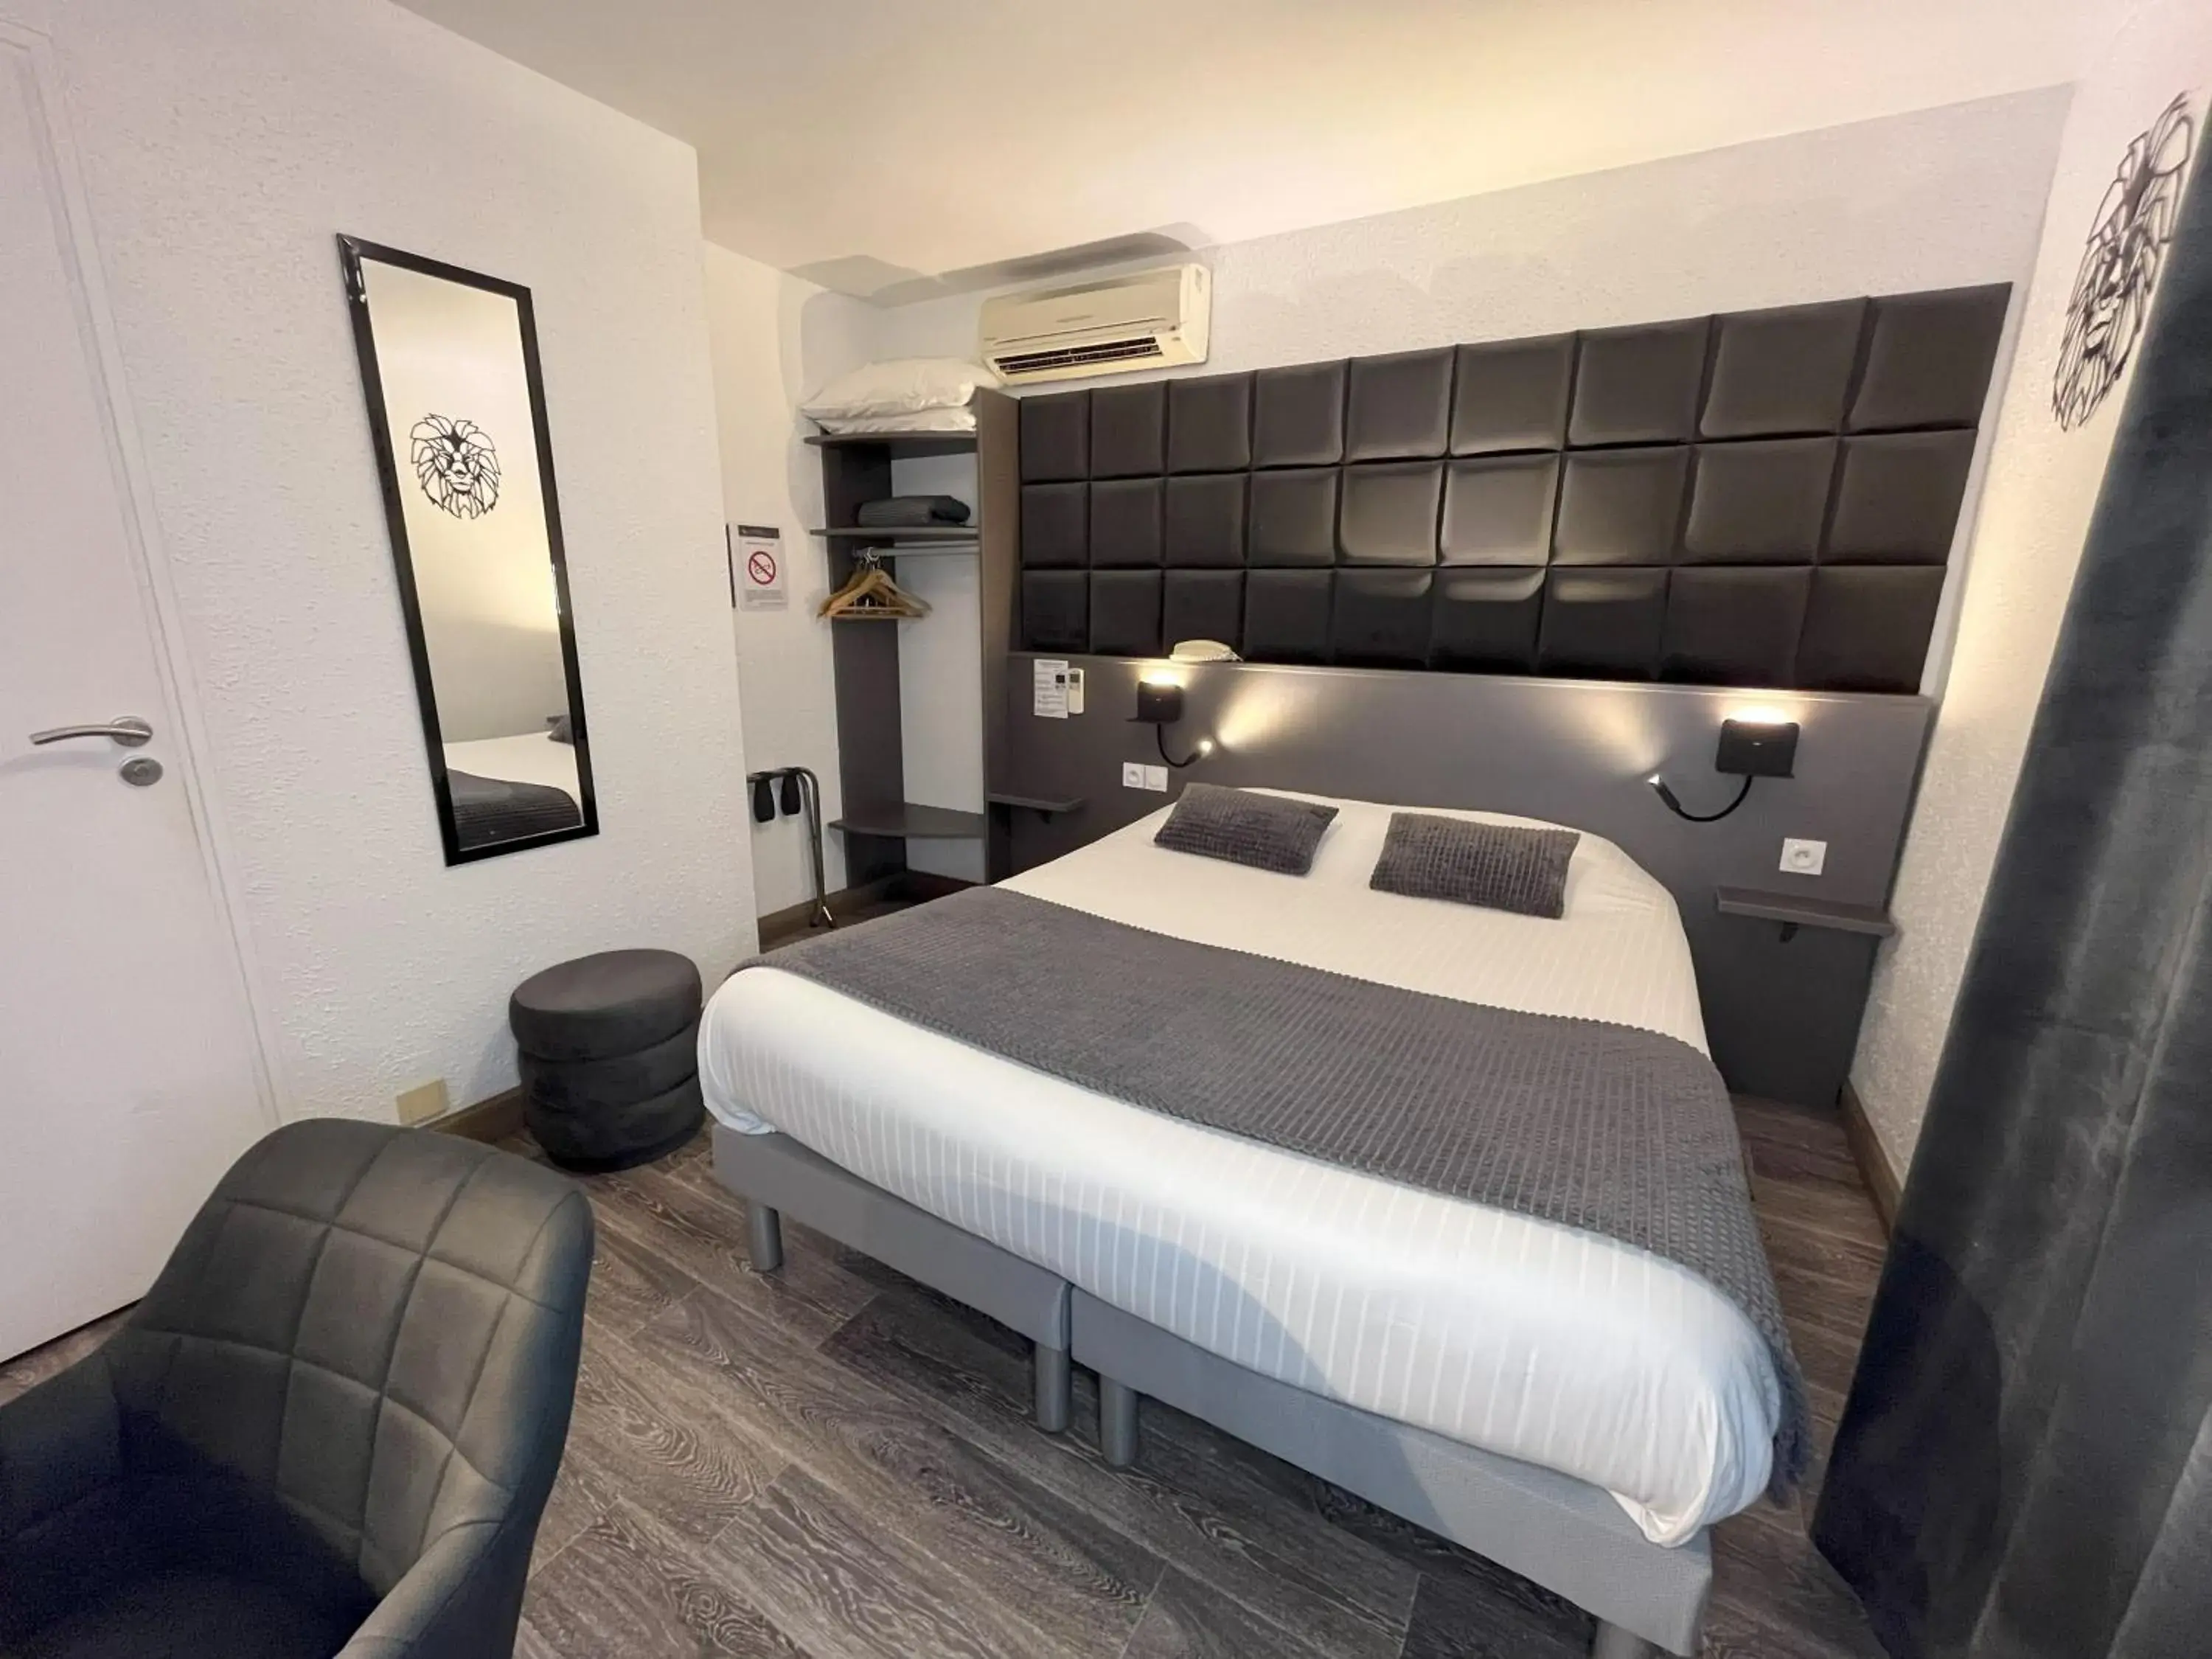 Facility for disabled guests, Bed in Cit'Hotel Le Cheval Blanc